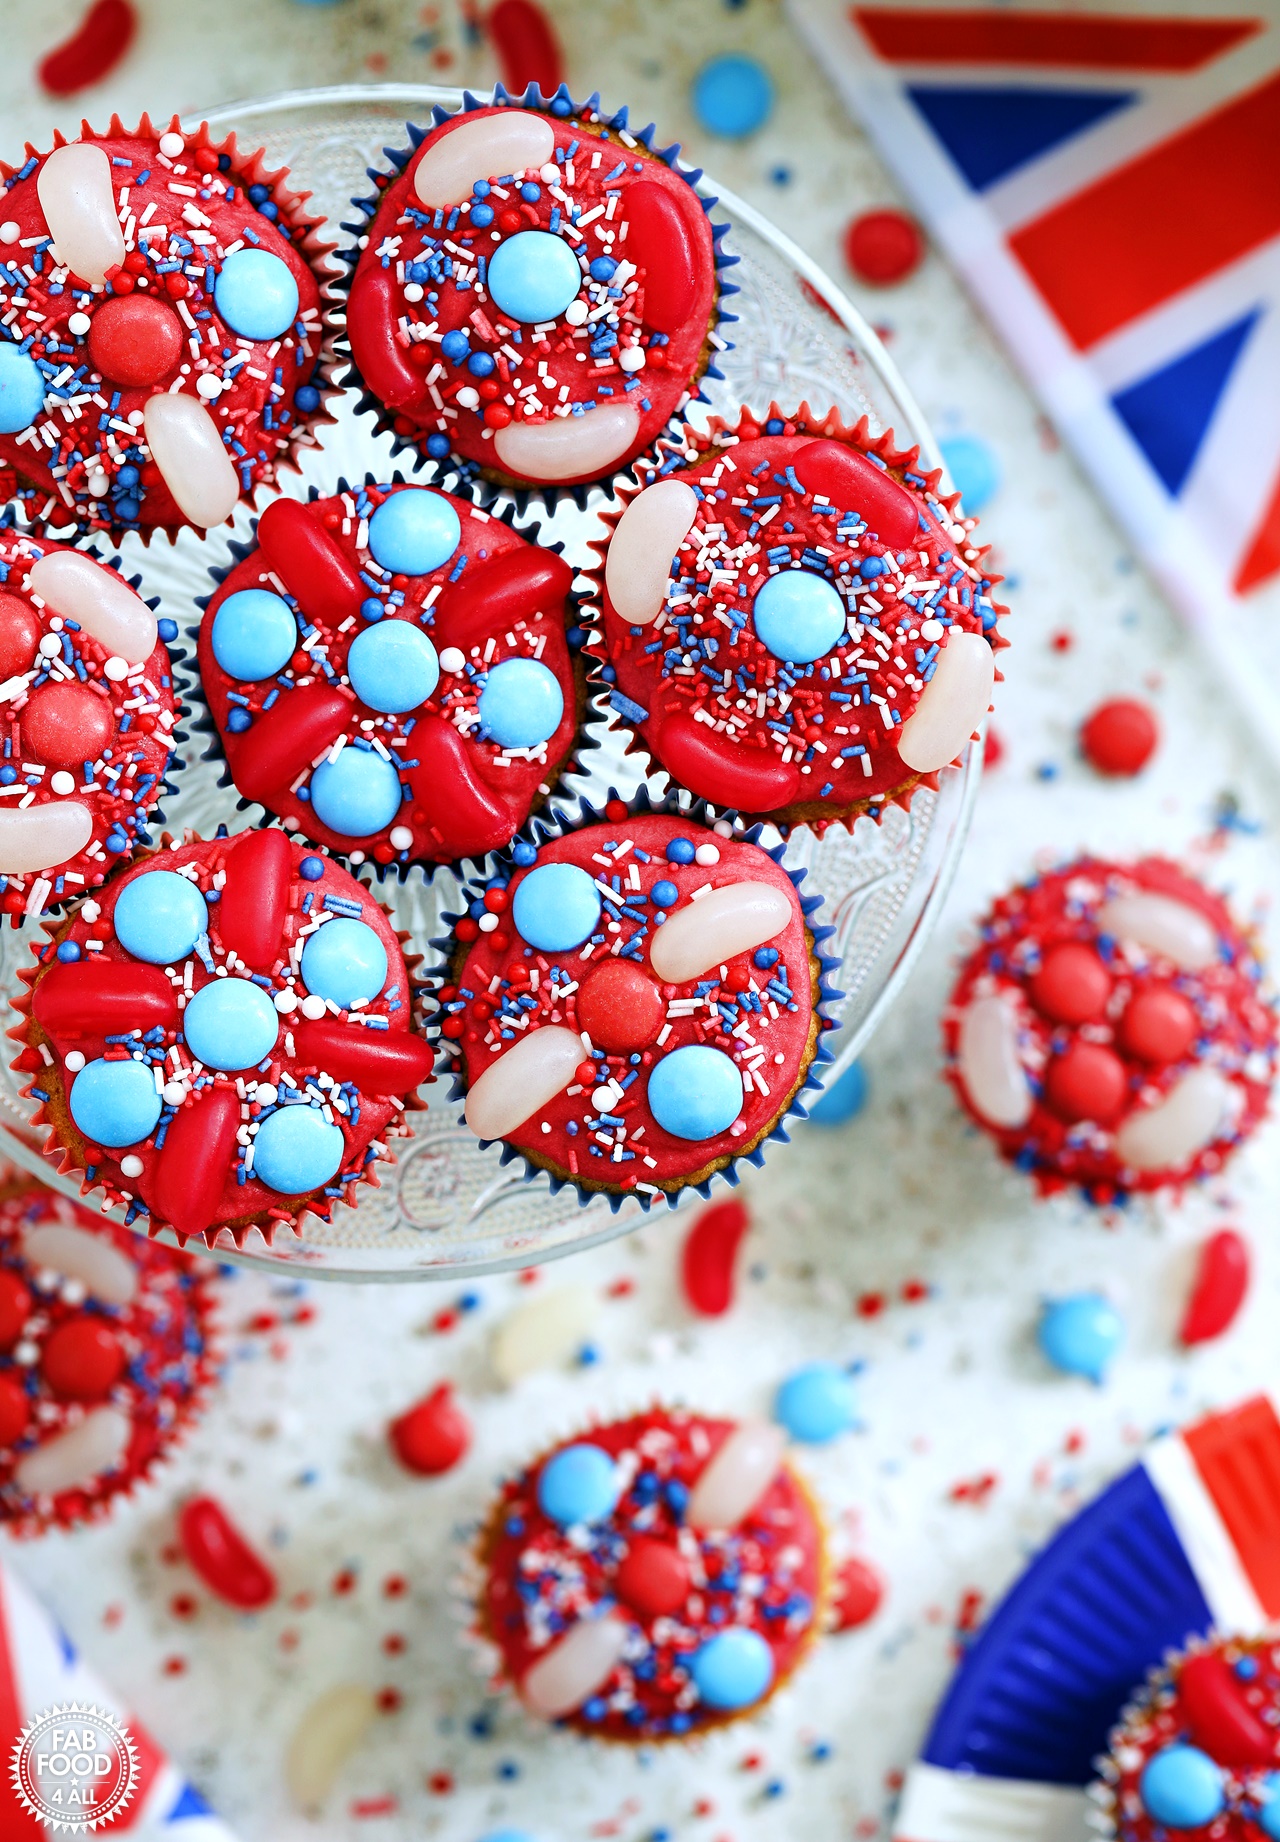 Aerial view of Jubilee Cupcakes on a cake stand with Union Jack flag and plate.